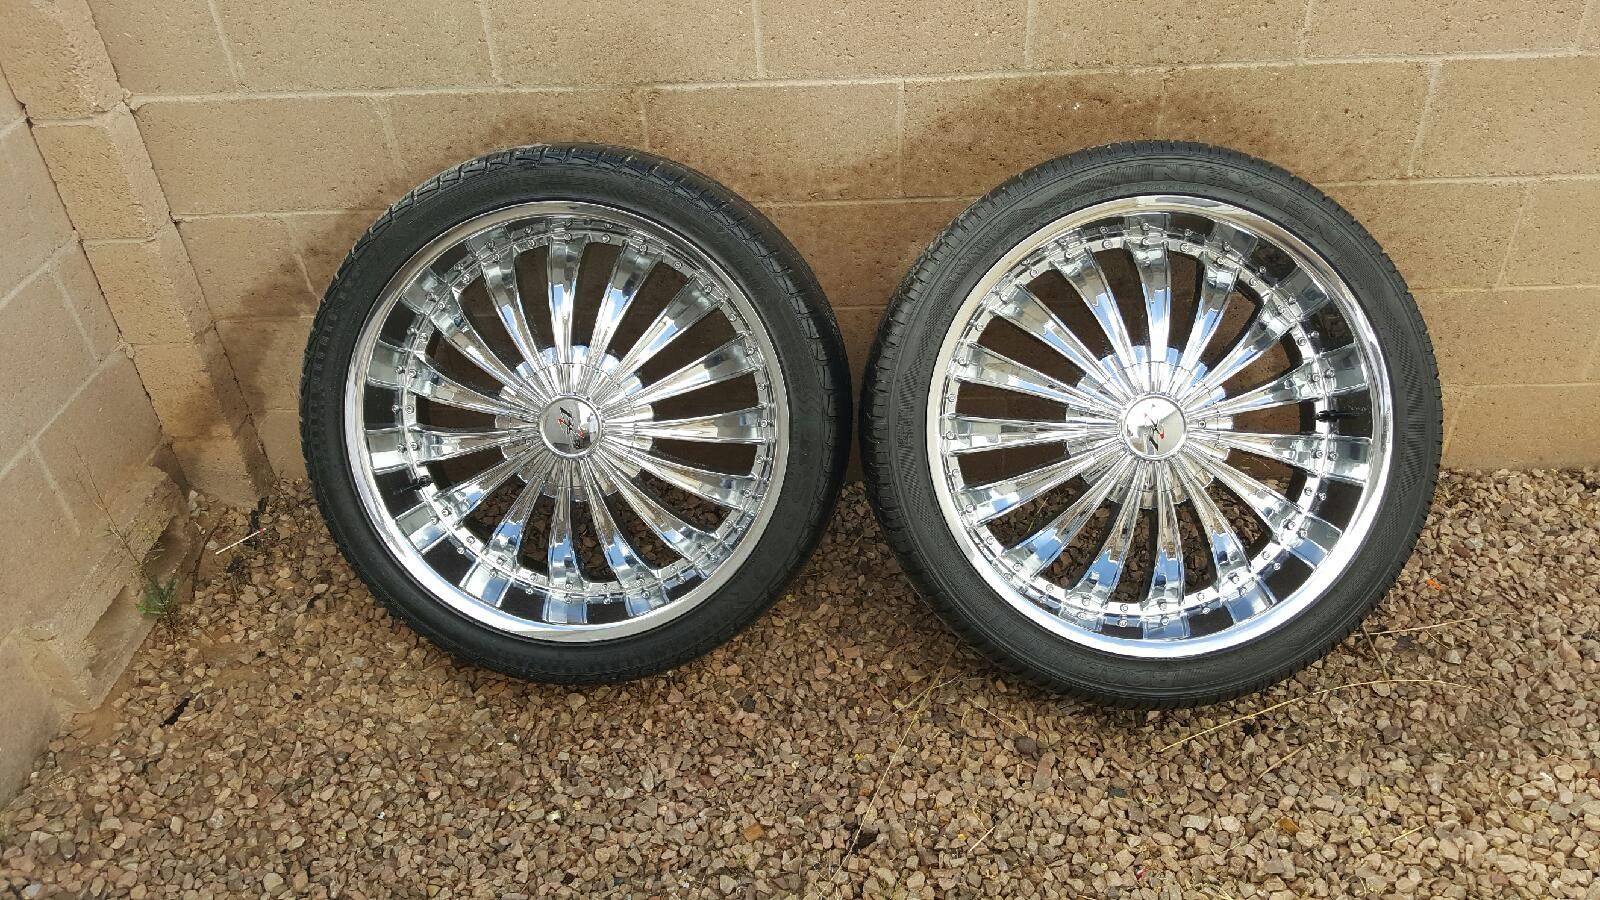 24 inch rims with new rubber